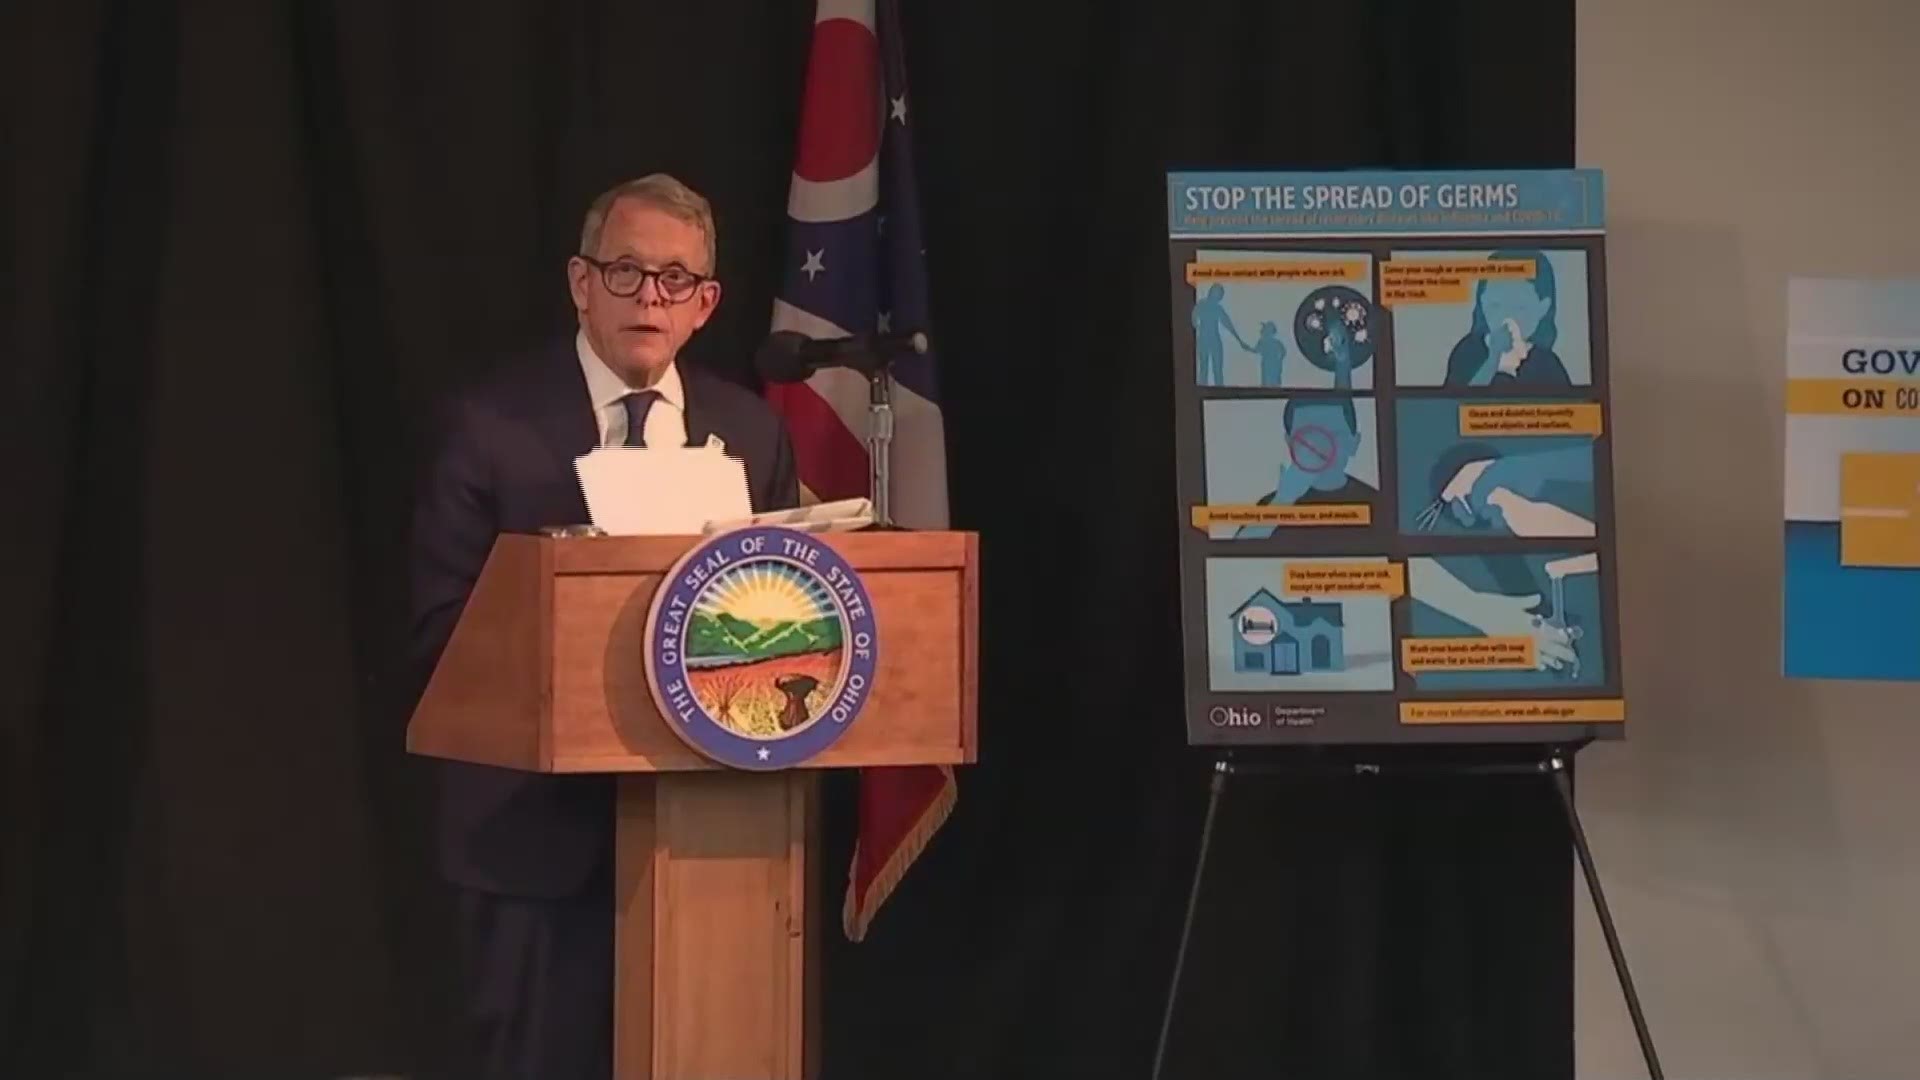 March 5, 2020: As coronavirus concerns continue, Ohio Gov. Mike DeWine offered an outline of what the state is doing to be prepared.